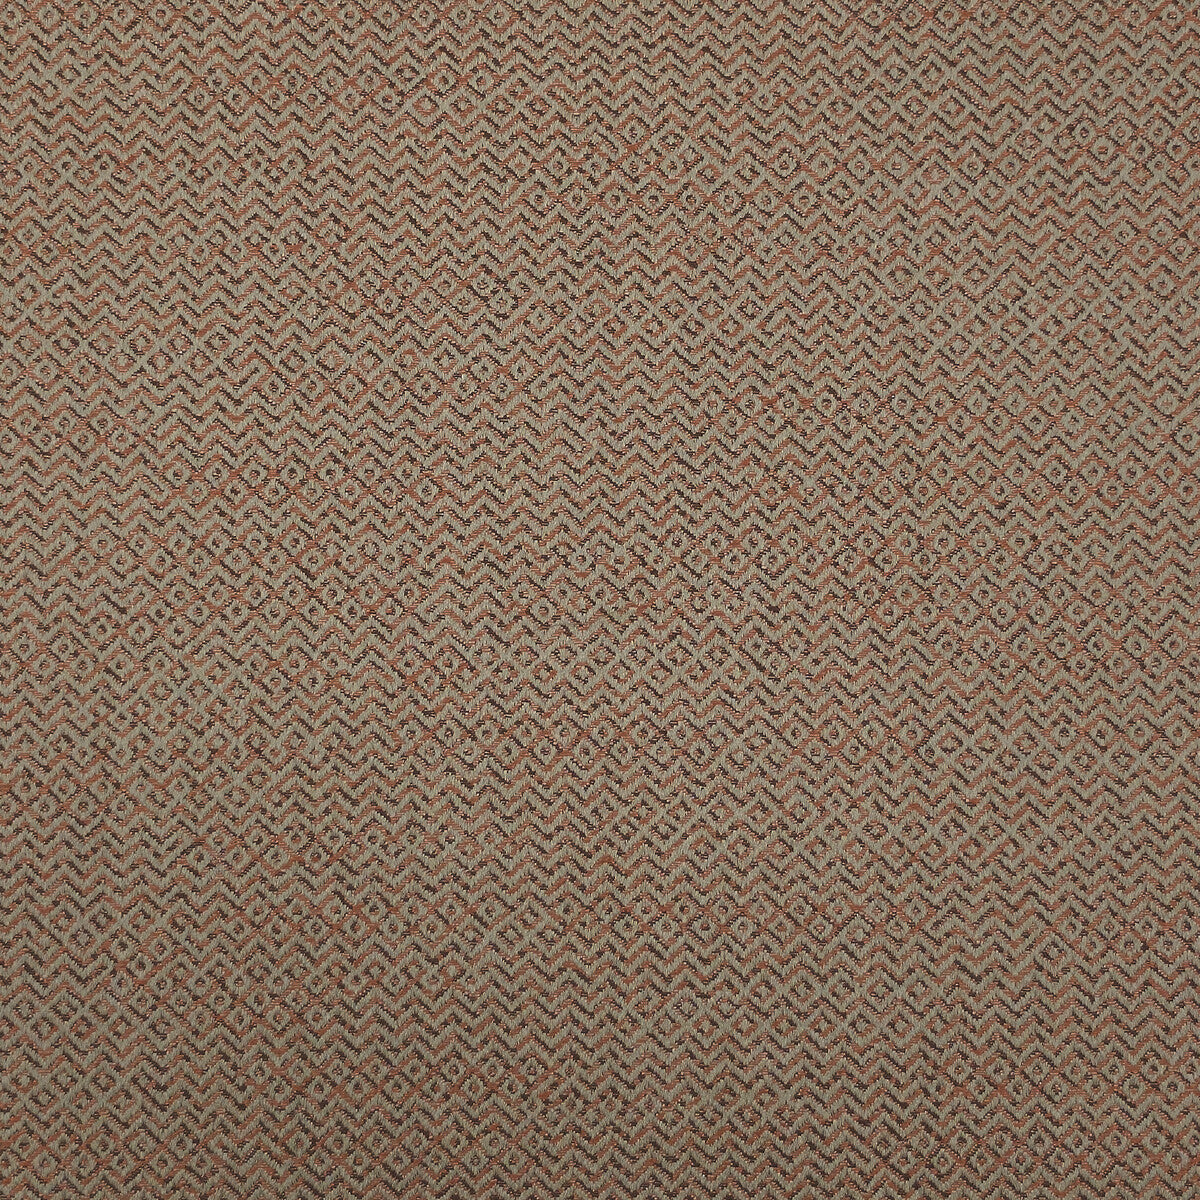 Kf Des fabric - pattern LZ-30203.18.0 - by Kravet Design in the Lizzo collection